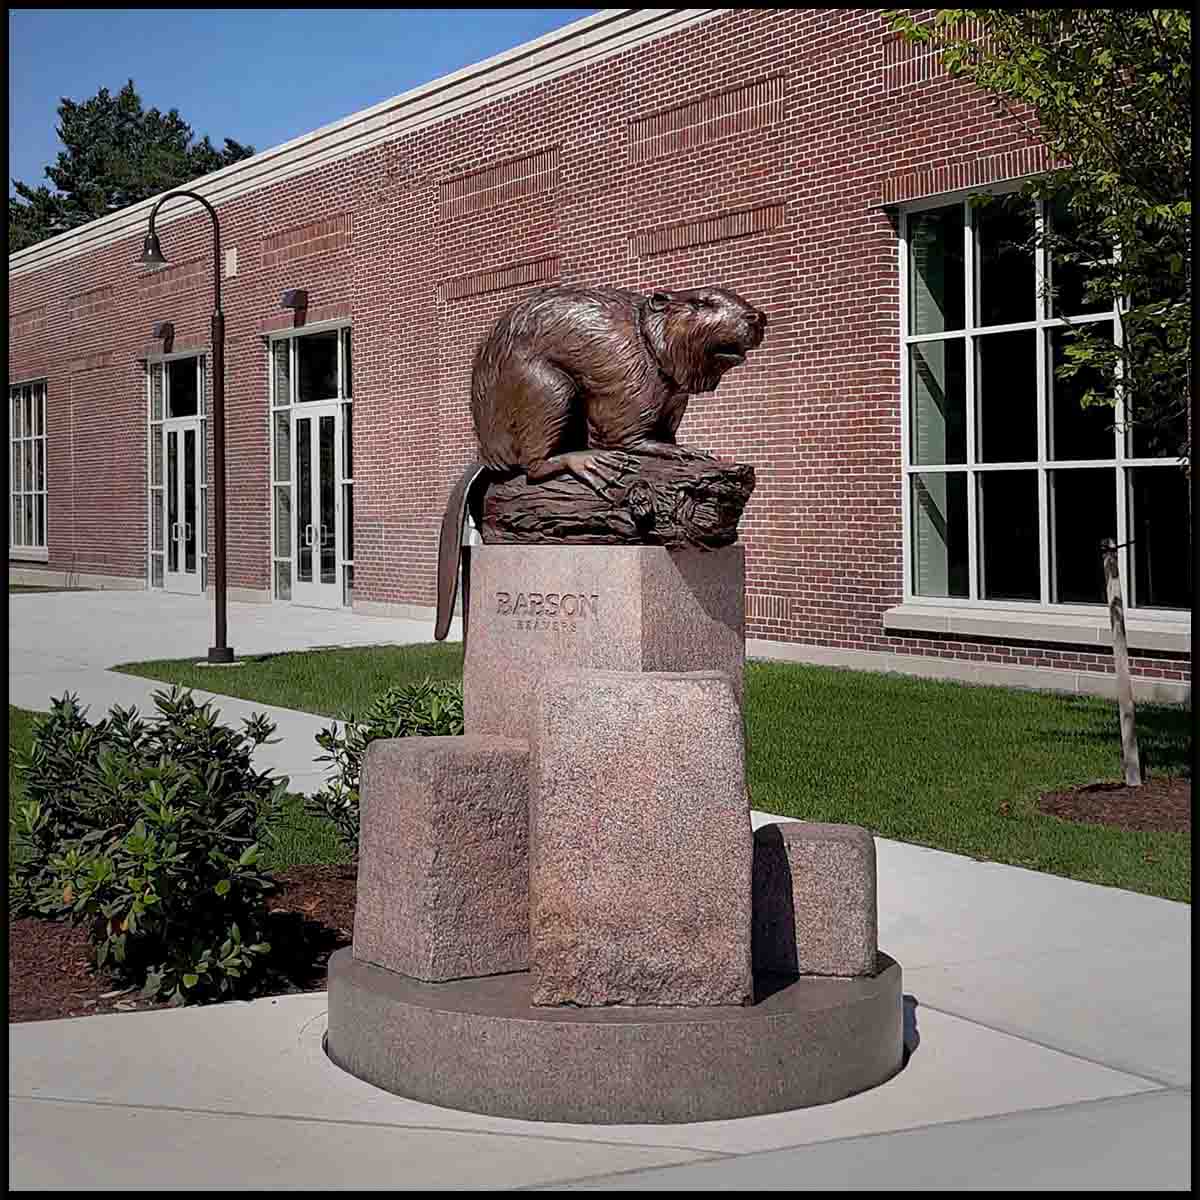 photo of bronze sculpture of beaver on log on granite base made of geometric and natural shapes in front of brick building